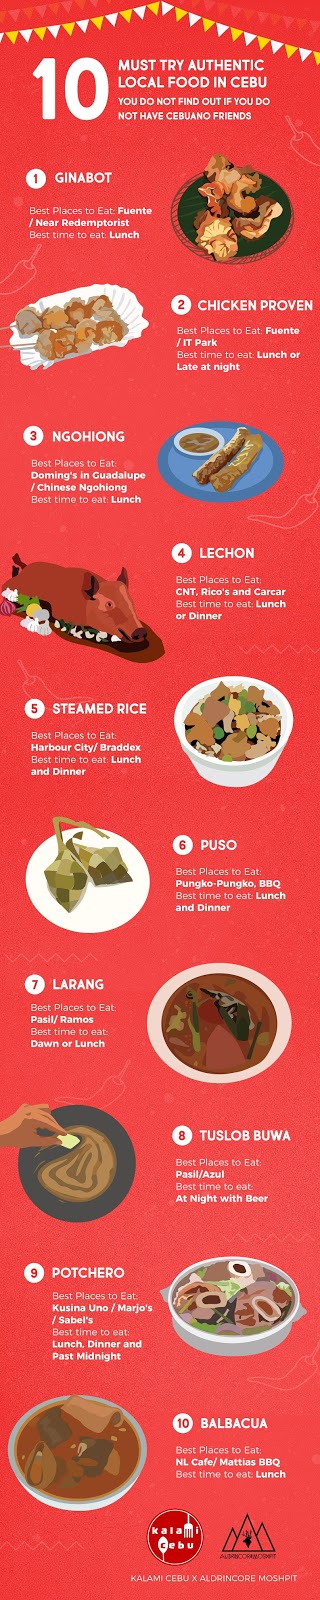 10 Must-Try Authentic Local Food in Cebu You do not Find Out if You do